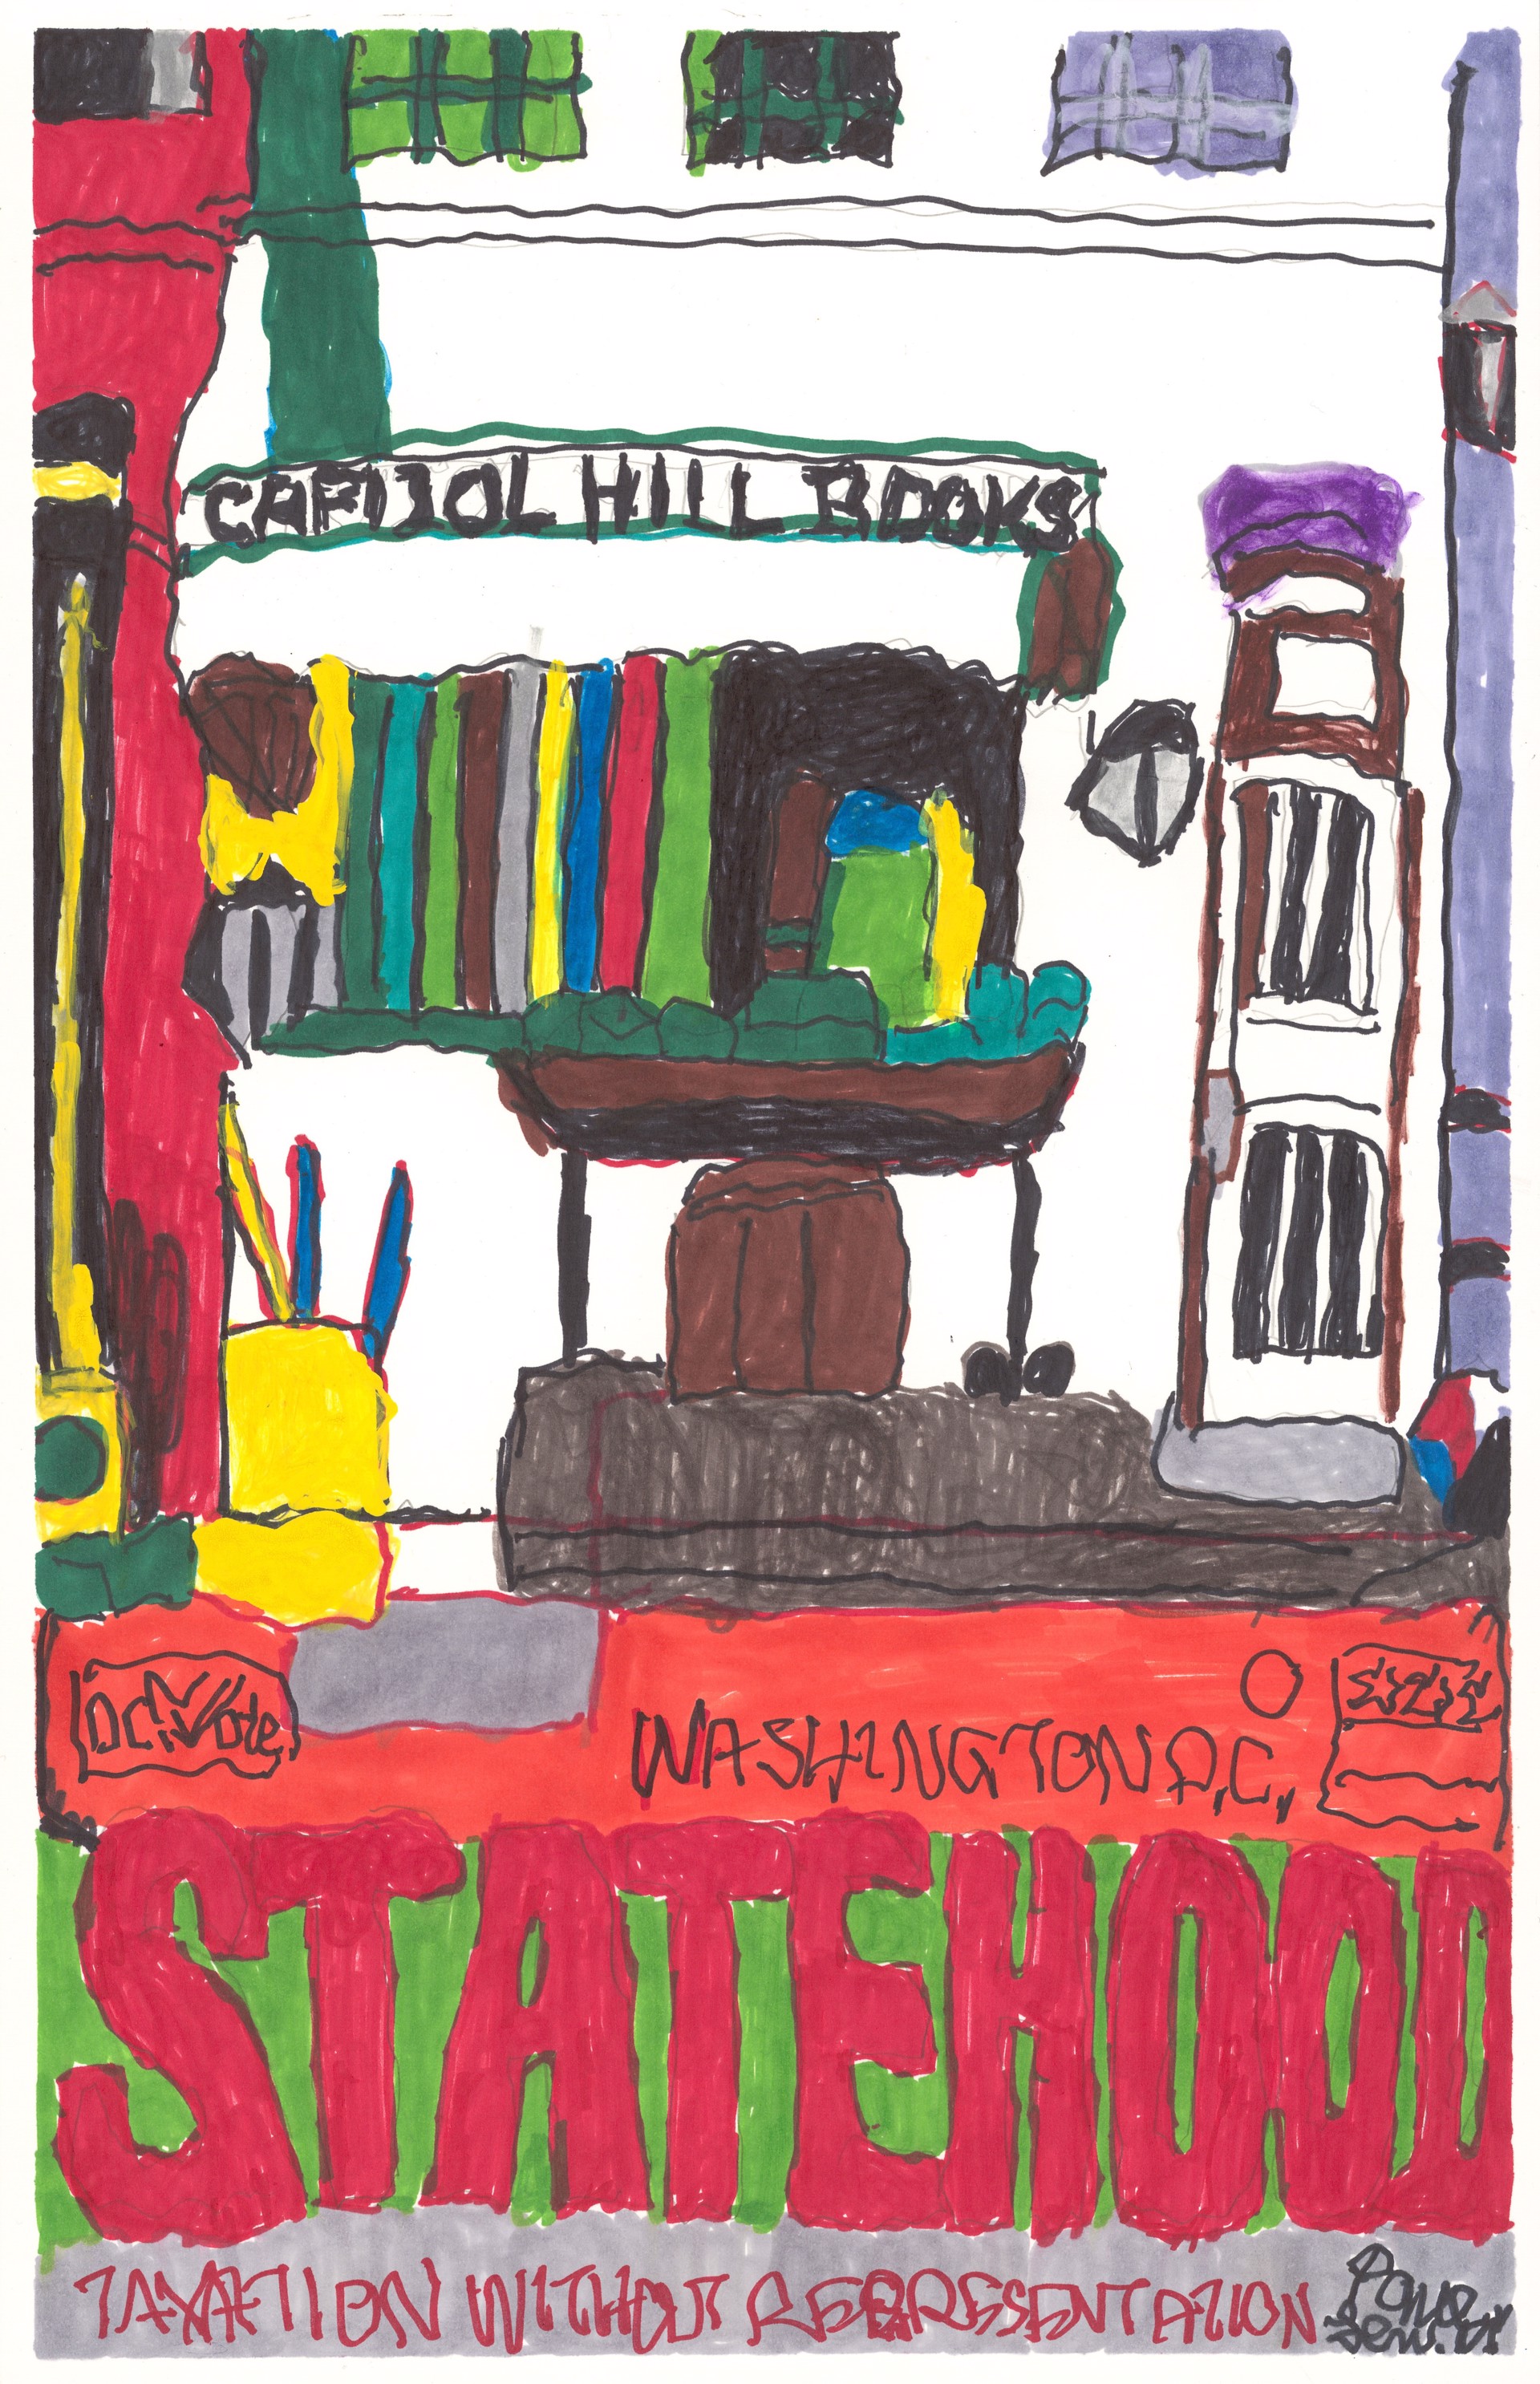 Capitol Hill Books (Statehood for DC) by Paul Lewis